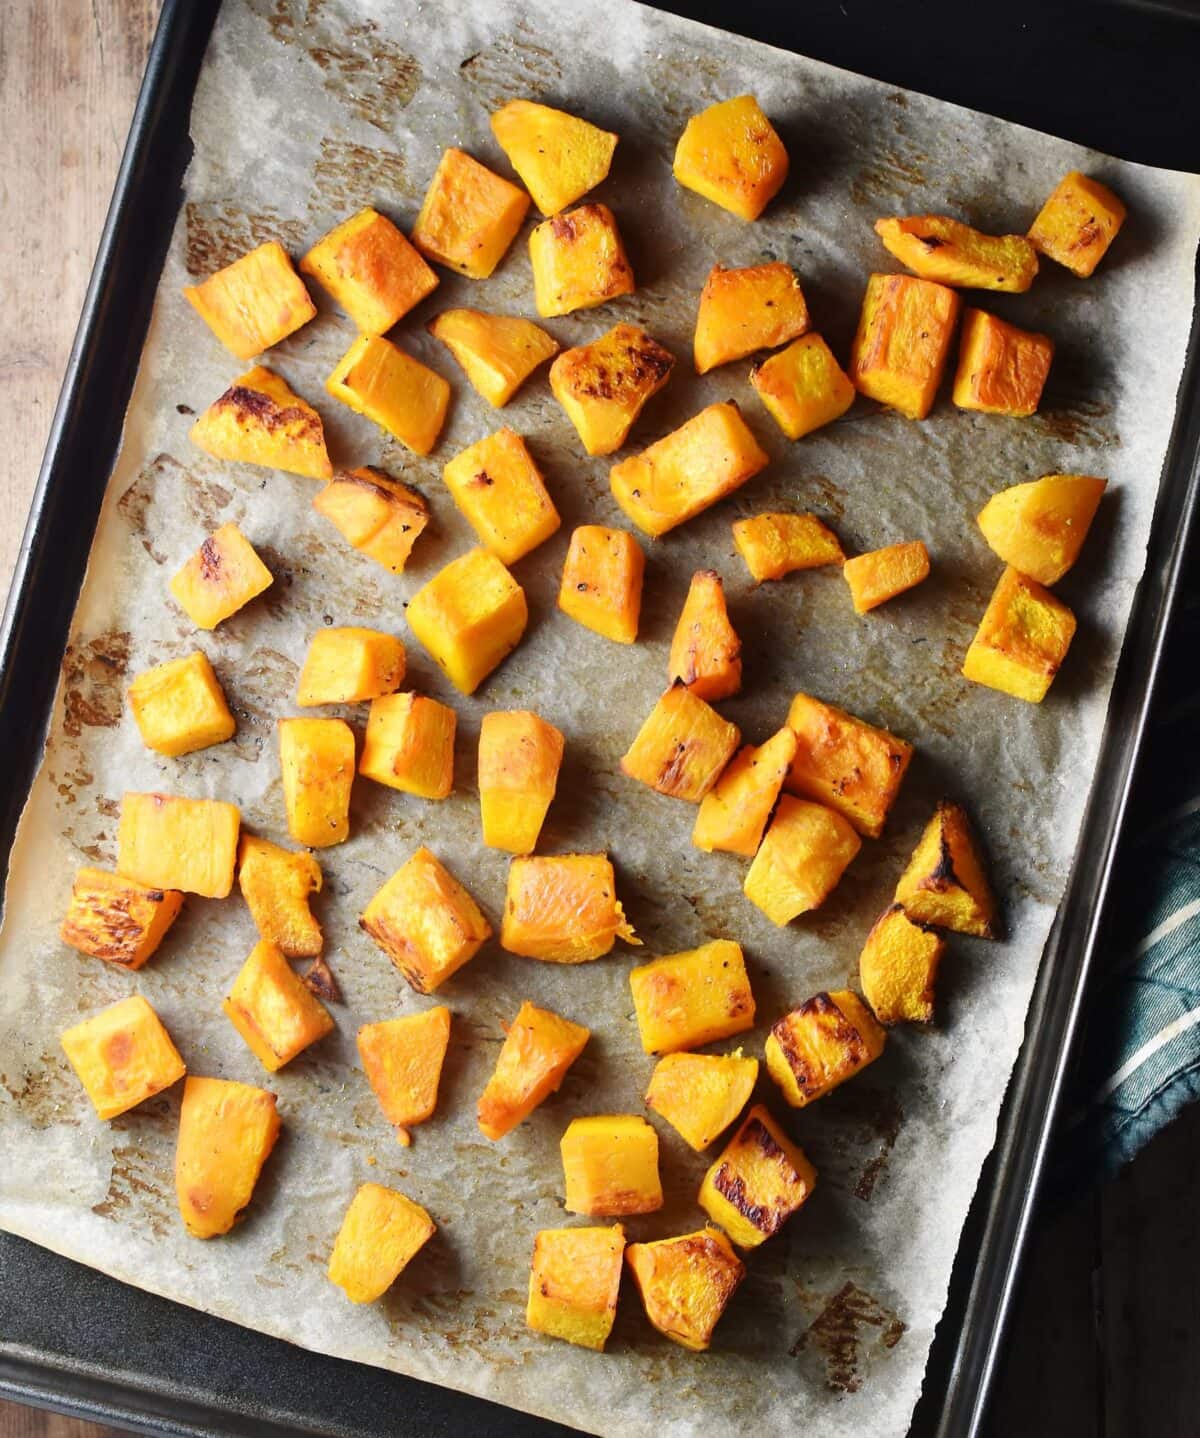 Roasted pumpkin cubes on top of baking sheet lined with parchment paper.